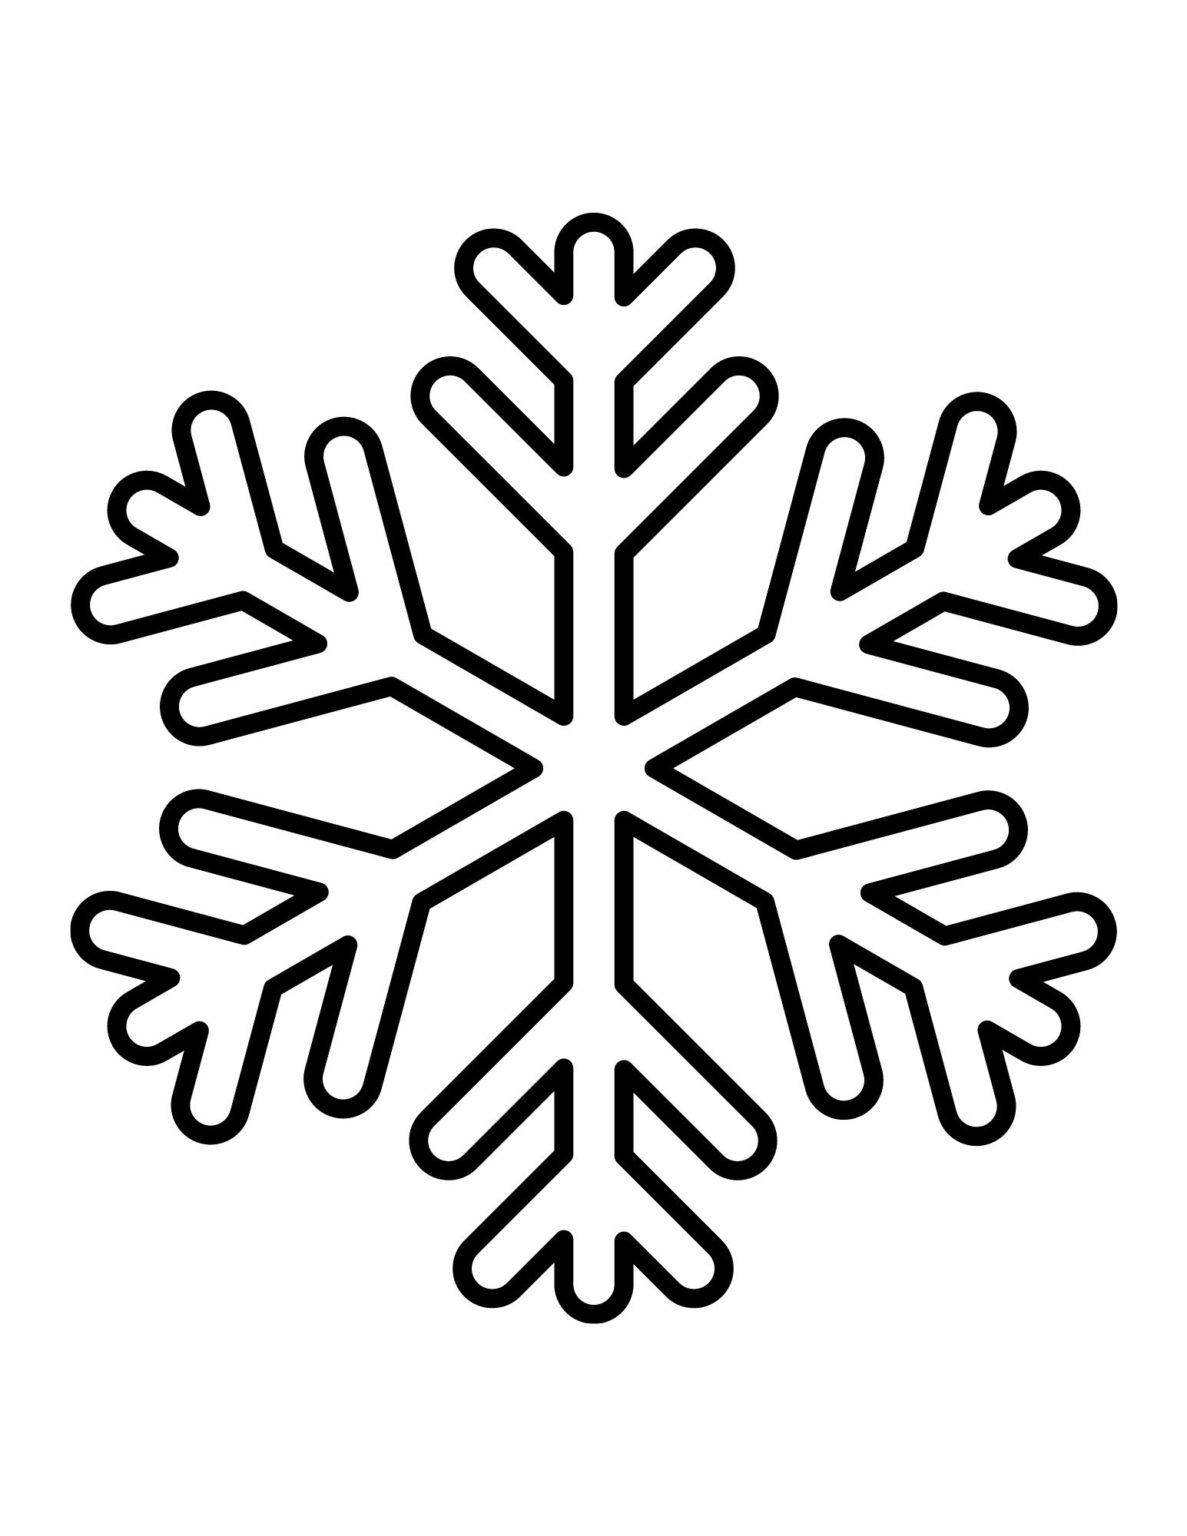 FREE Printable Snowflake Patterns (Large and Small Snowflakes